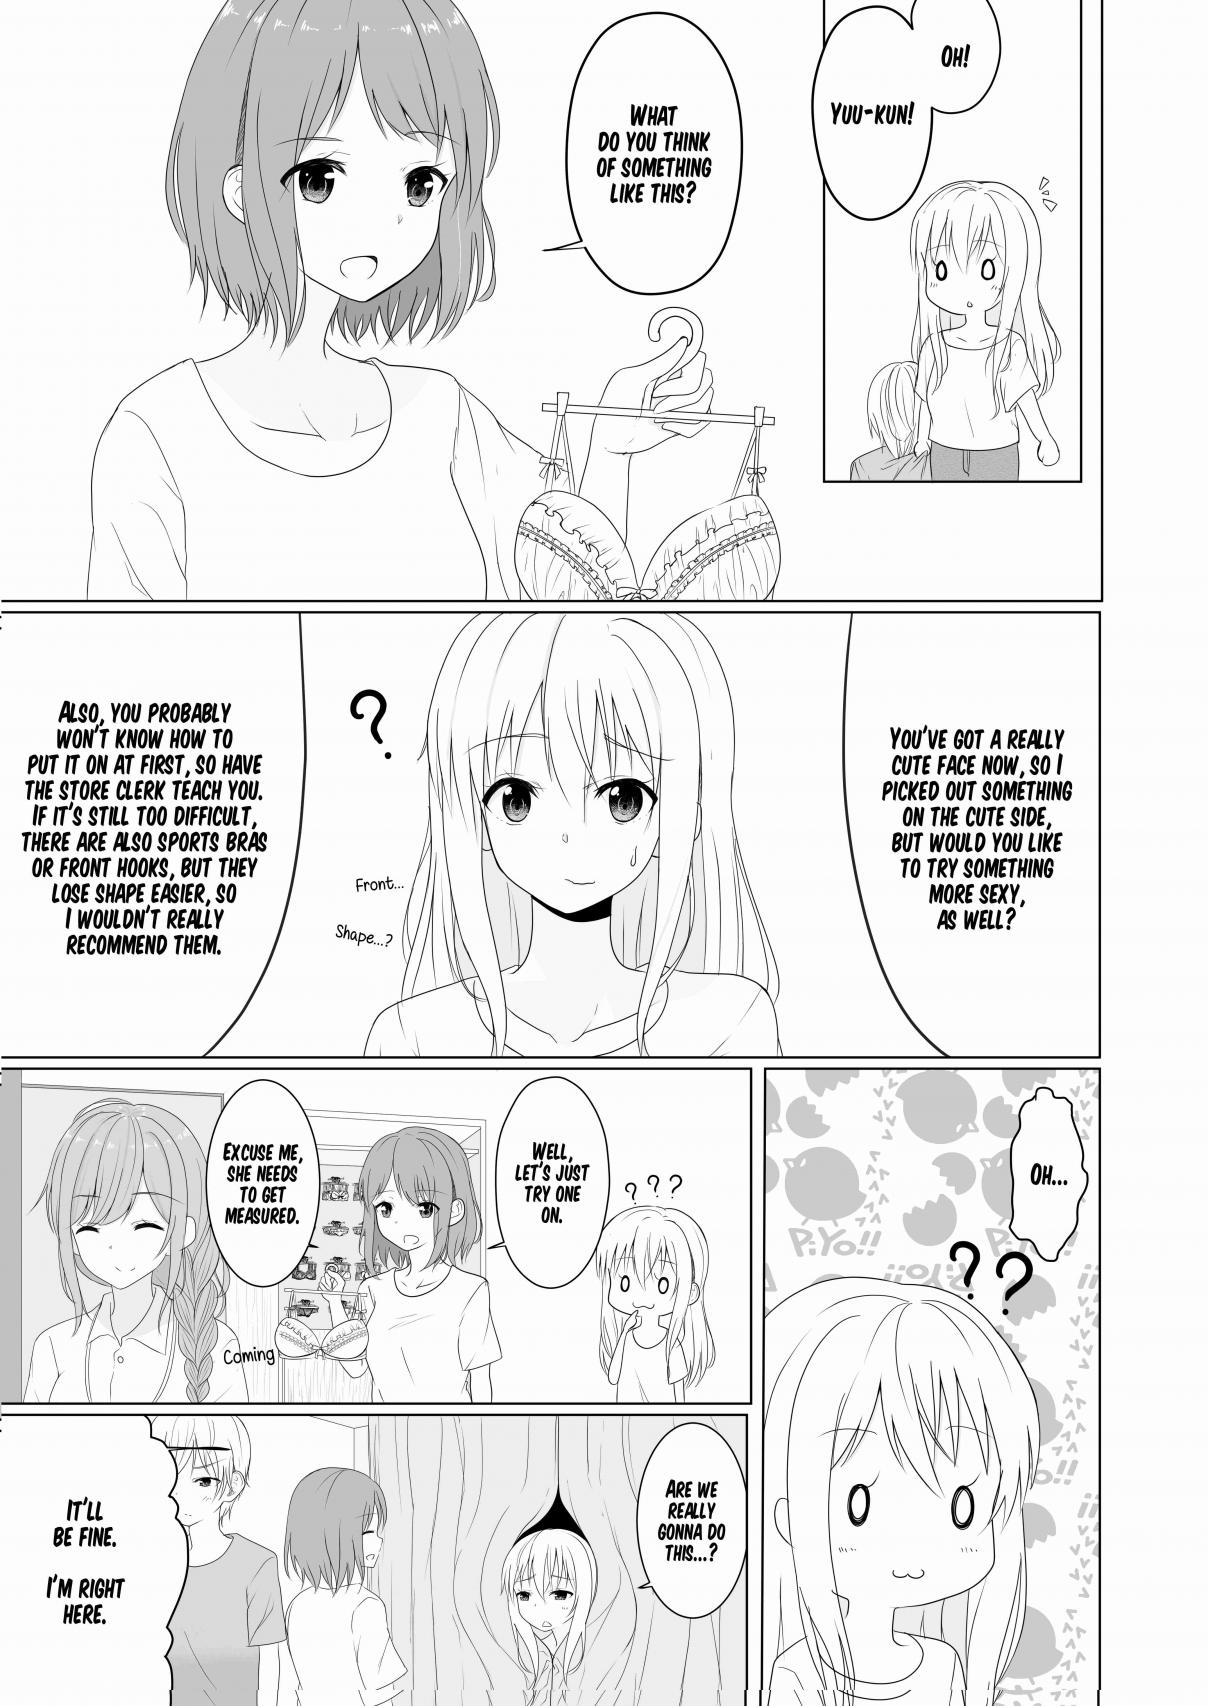 A Boy who Loves Genderswap got Genderswapped so He acts out His Ideal Genderswap Girl Ch. 4